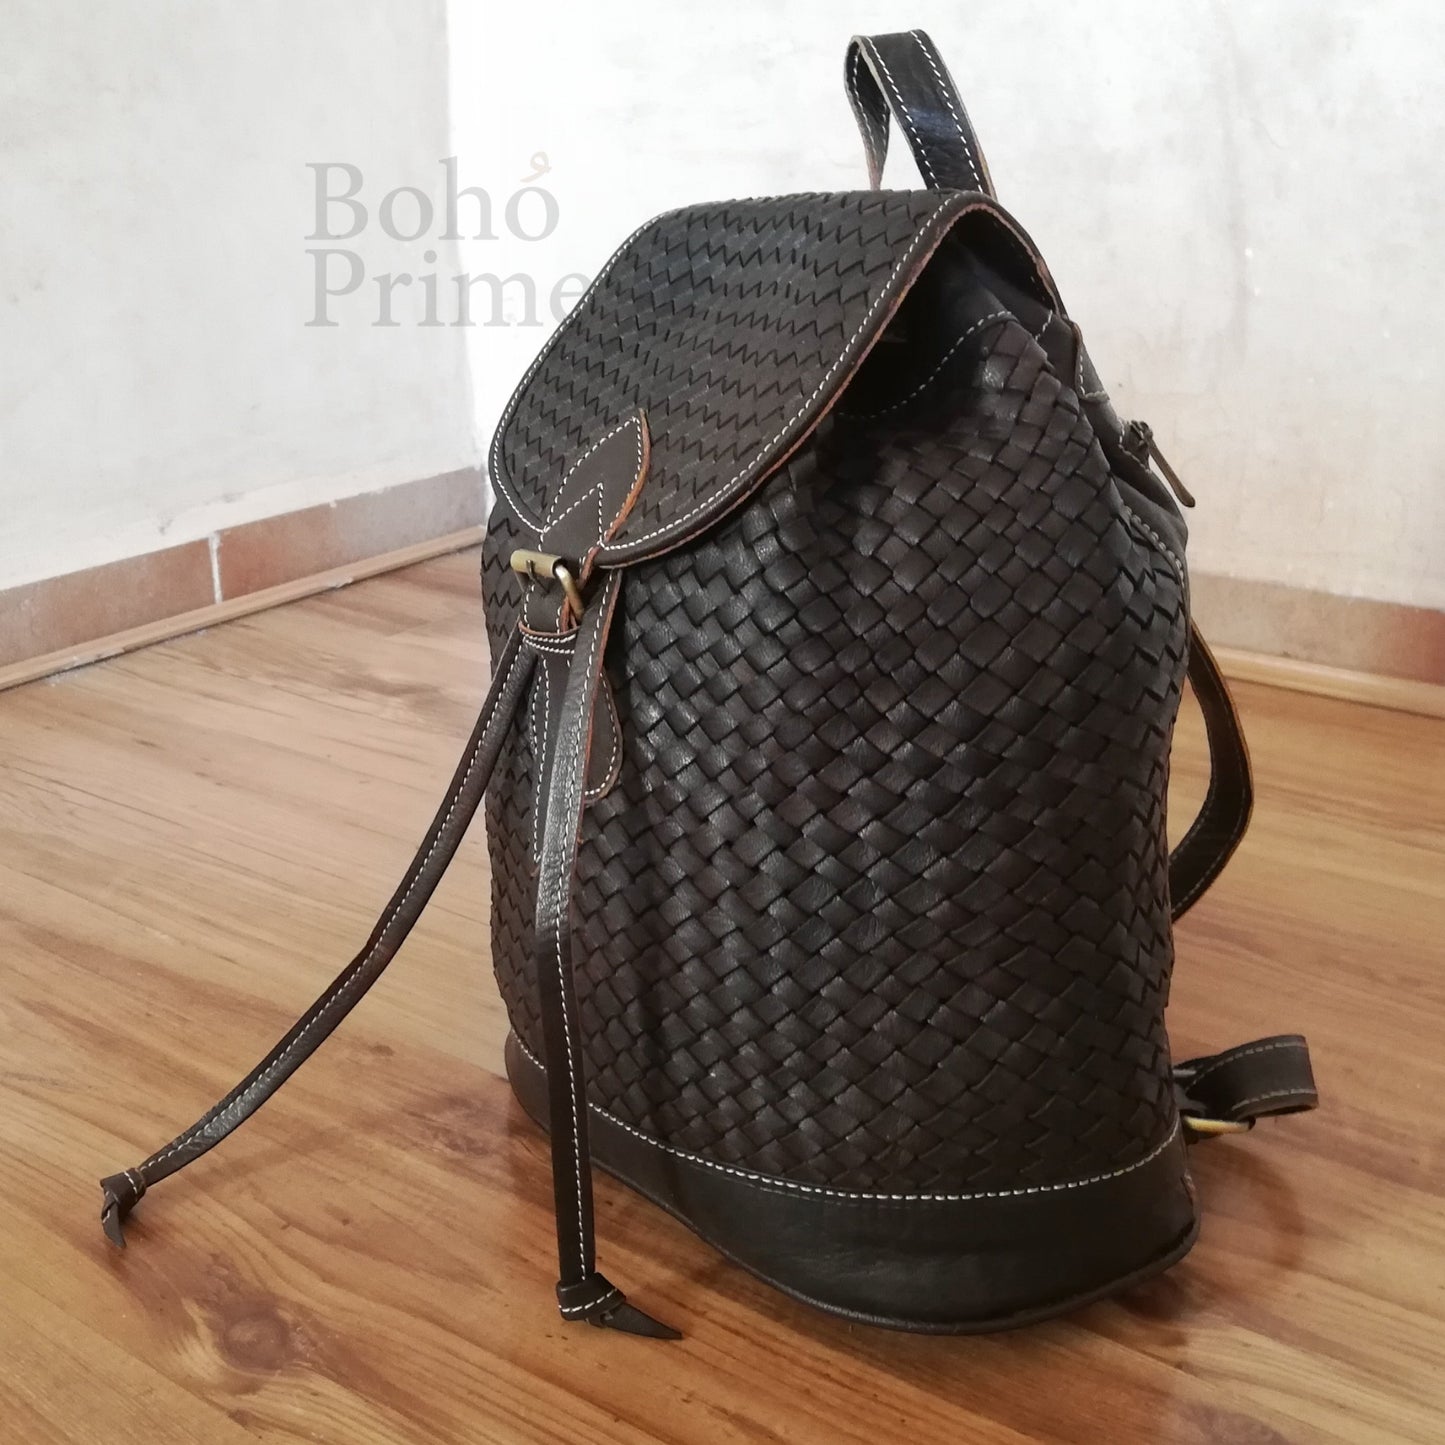 Handmade gift Moroccan Leather Backpack Vintage look Leather Bag